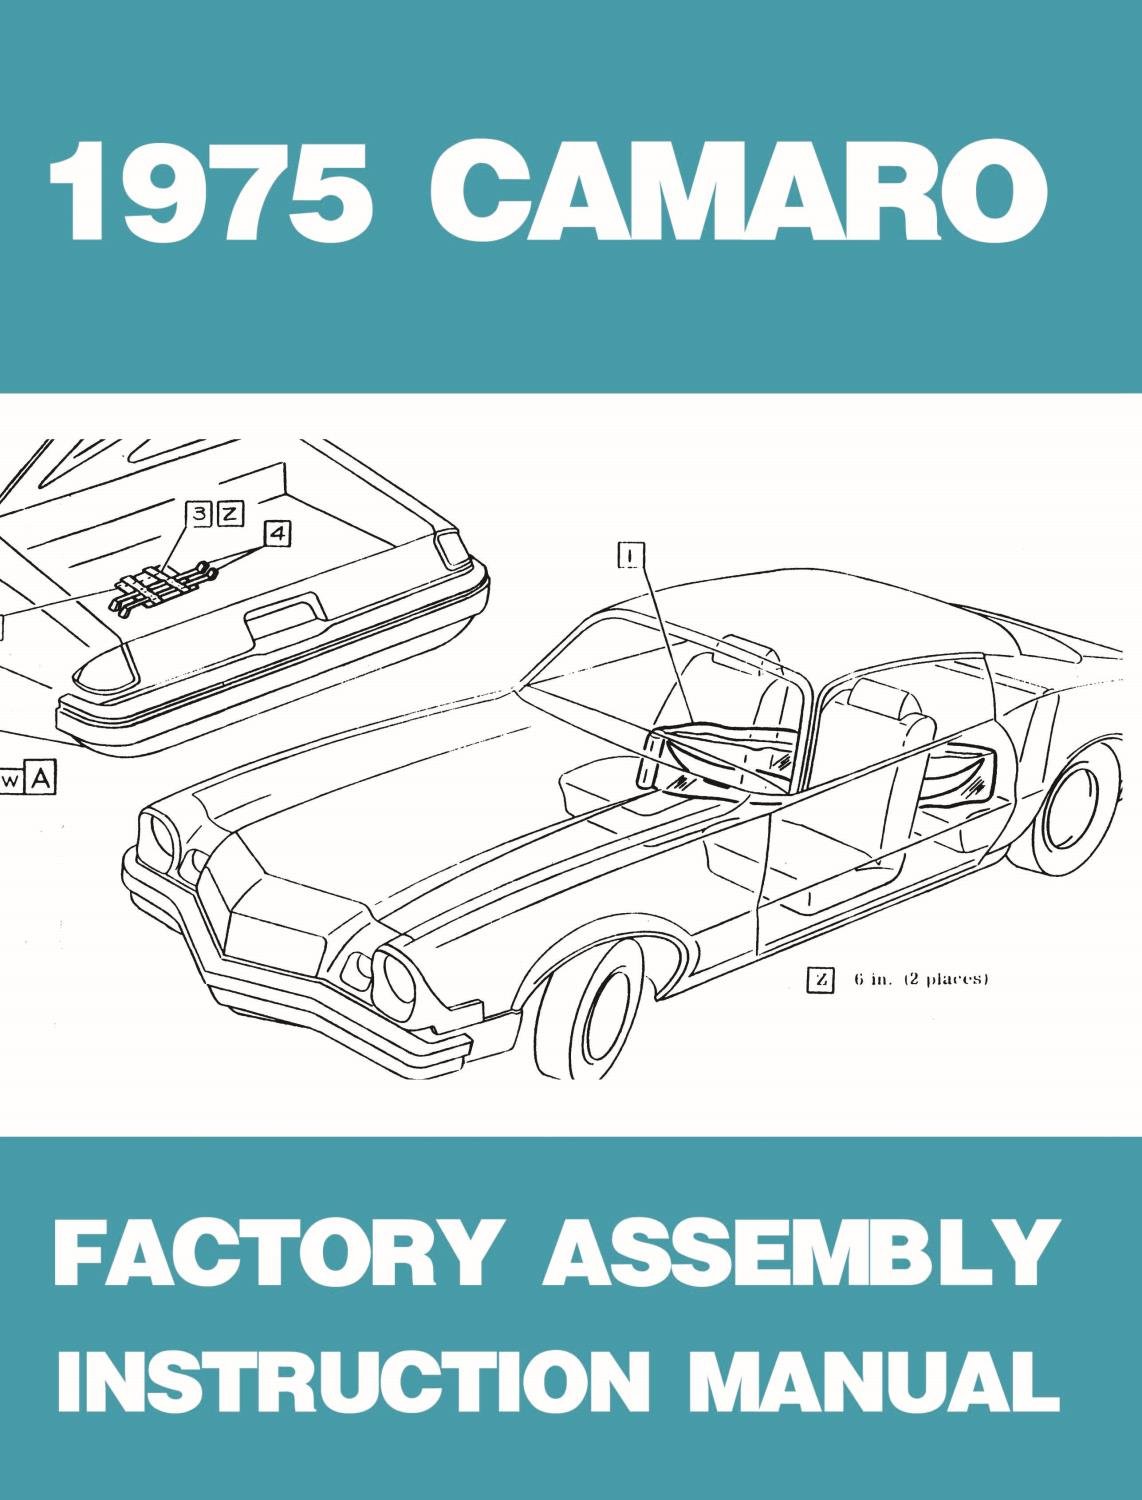 Factory Assembly Instruction Manual for 1975 Chevrolet Camaro